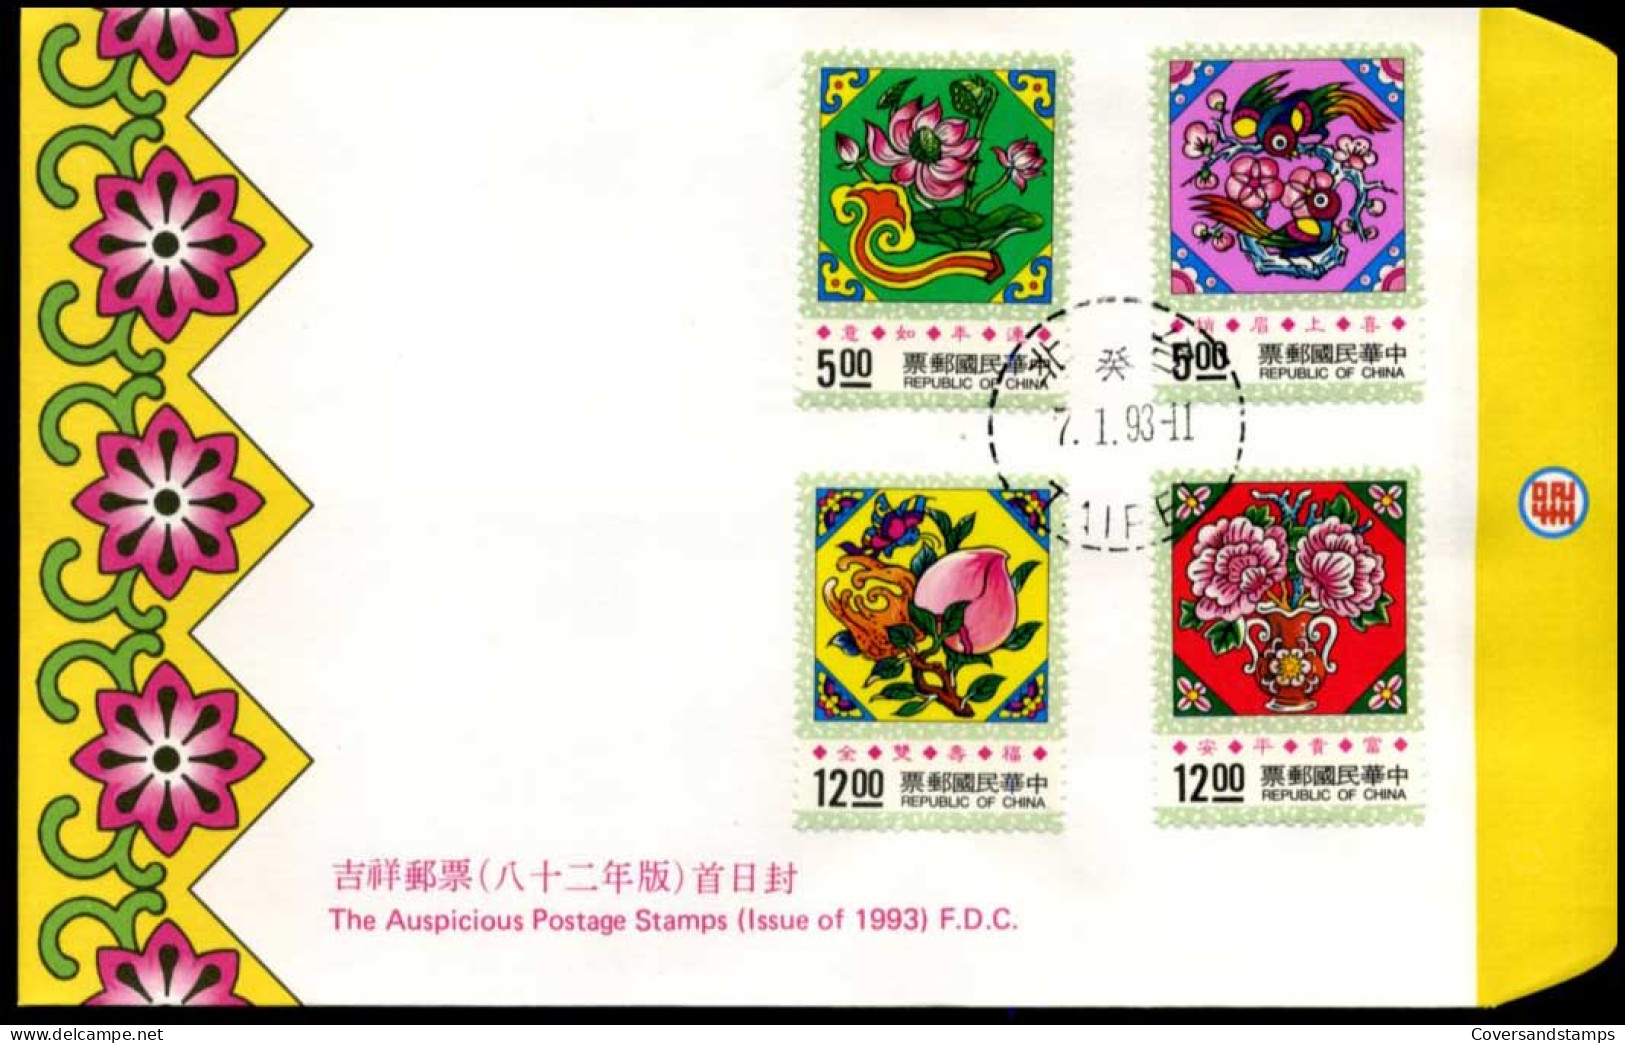 Taiwan - FDC - The Auspicious Postage Stamps - FDC